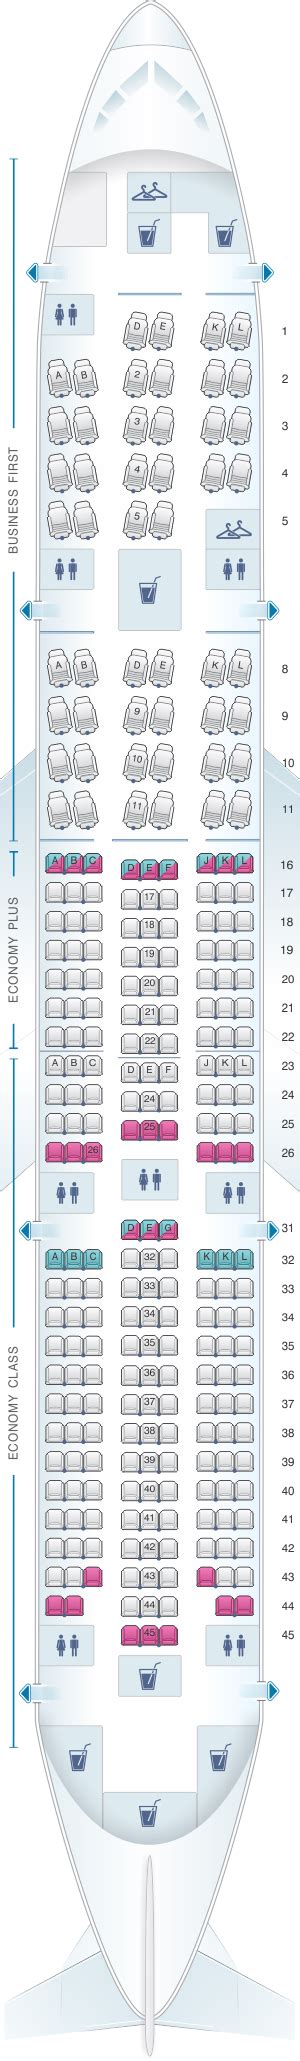 boeing 777 seating chart united airlines